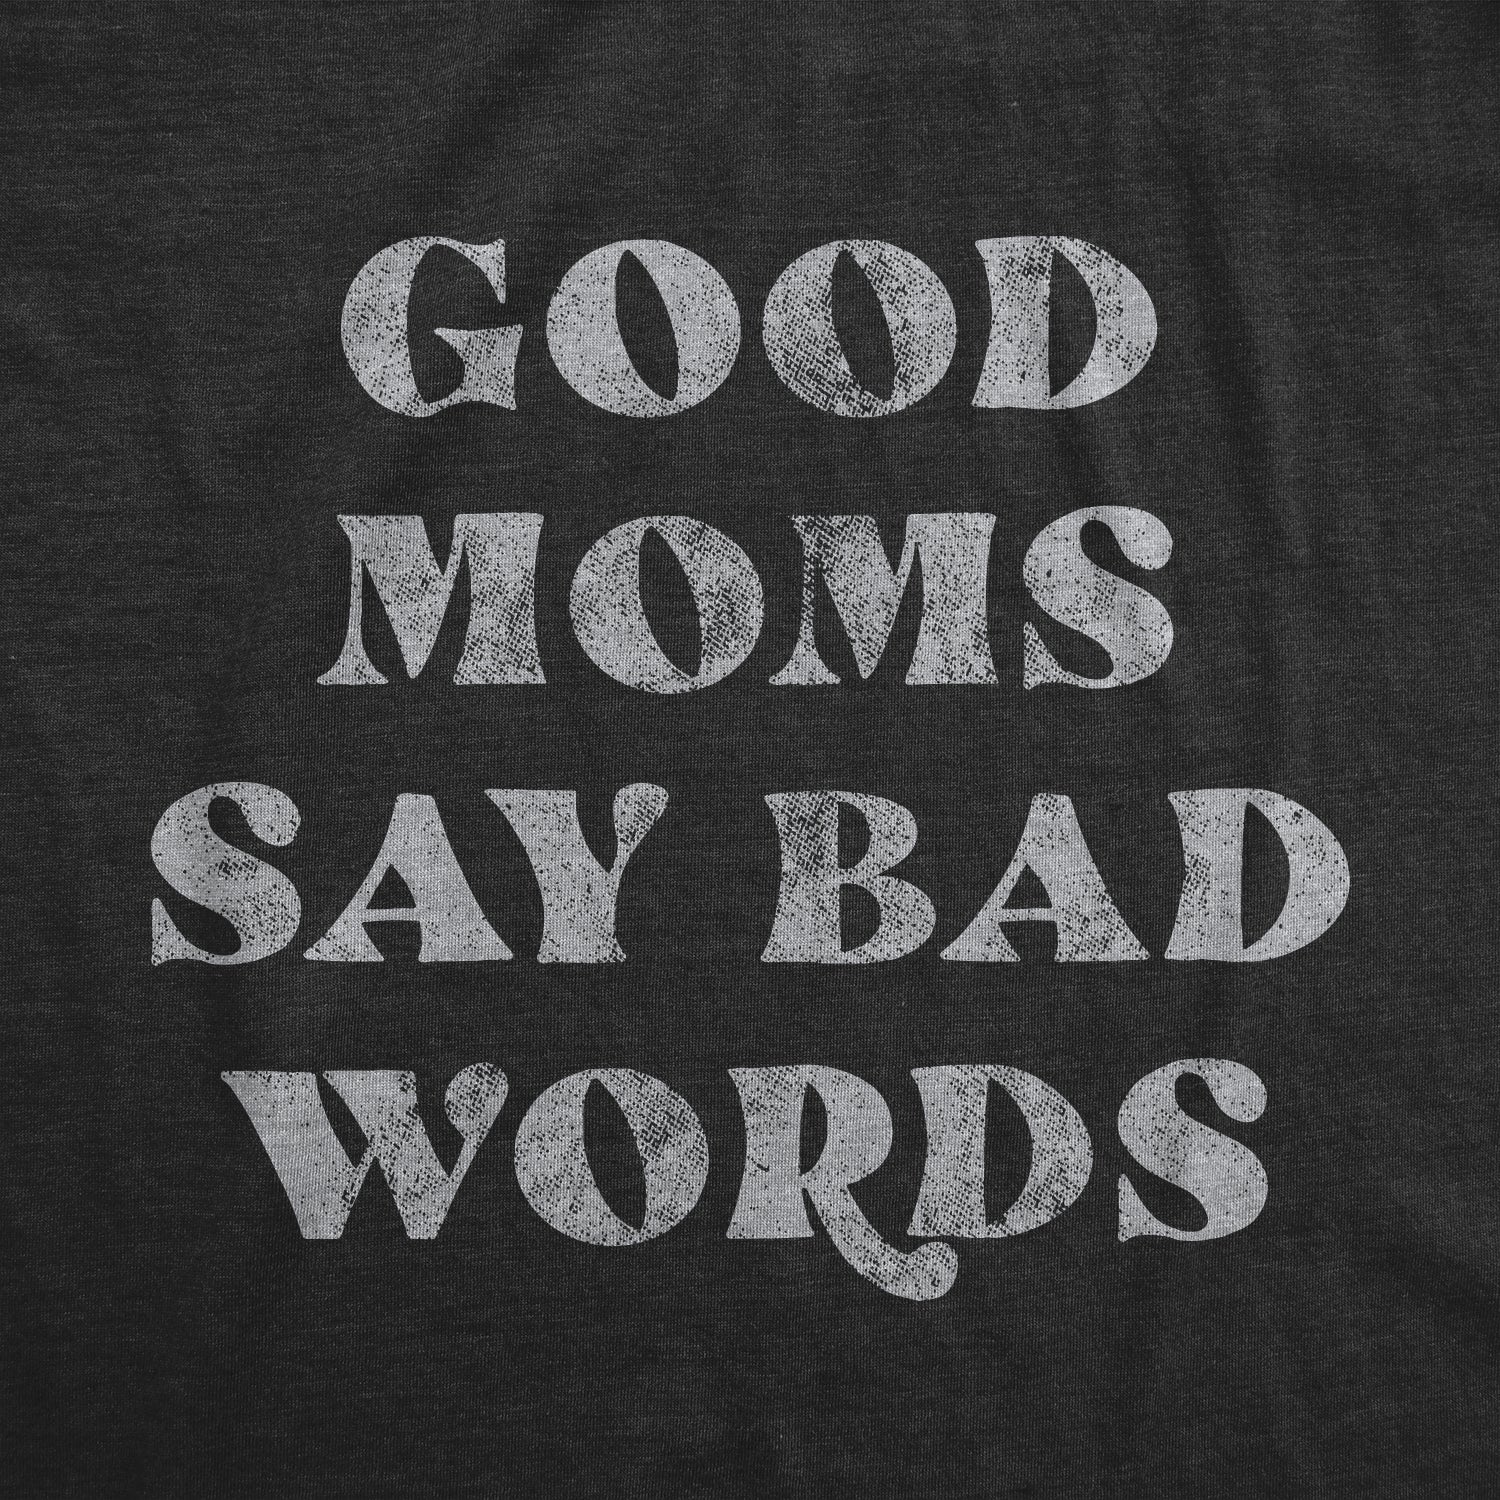 Funny Heather Black - Bad Words Good Moms Say Bad Words Womens T Shirt Nerdy Mother's Day Sarcastic Tee